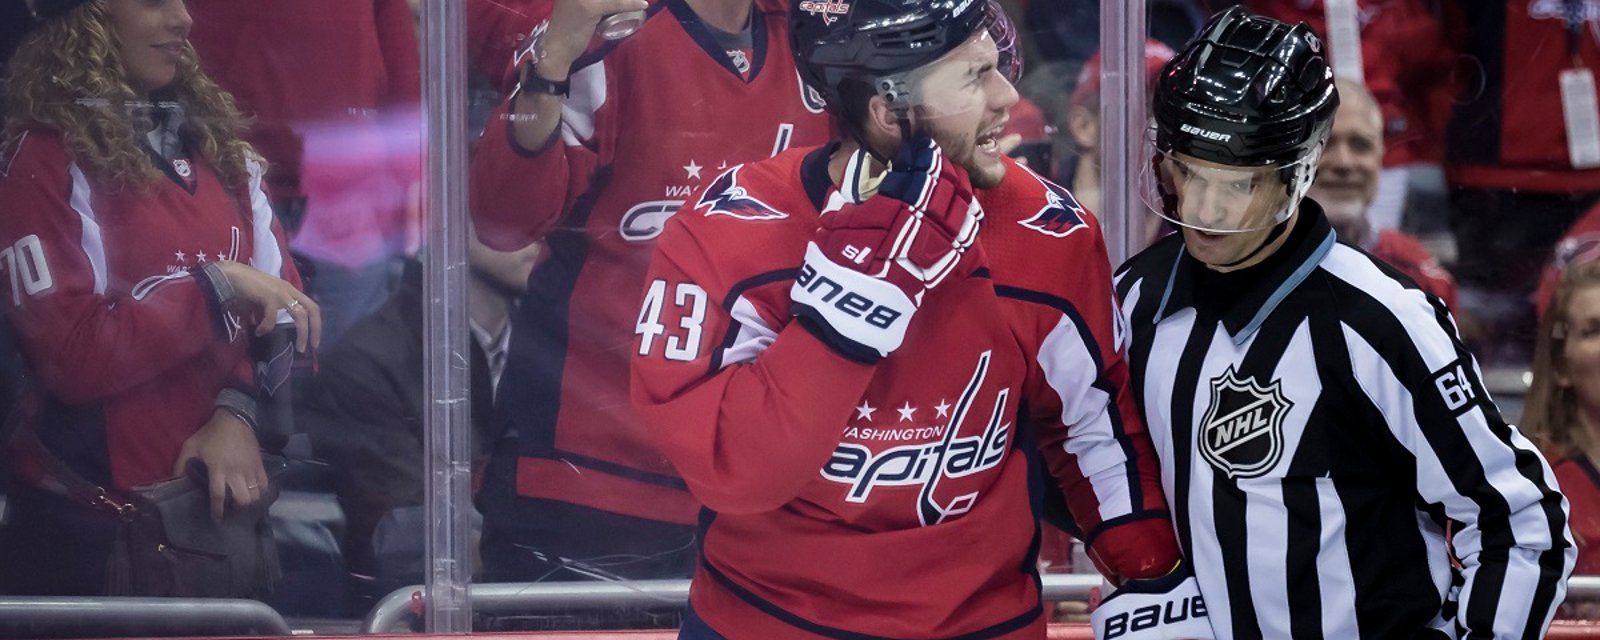 Tom Wilson's suspension delivers a huge blow to his bank account.